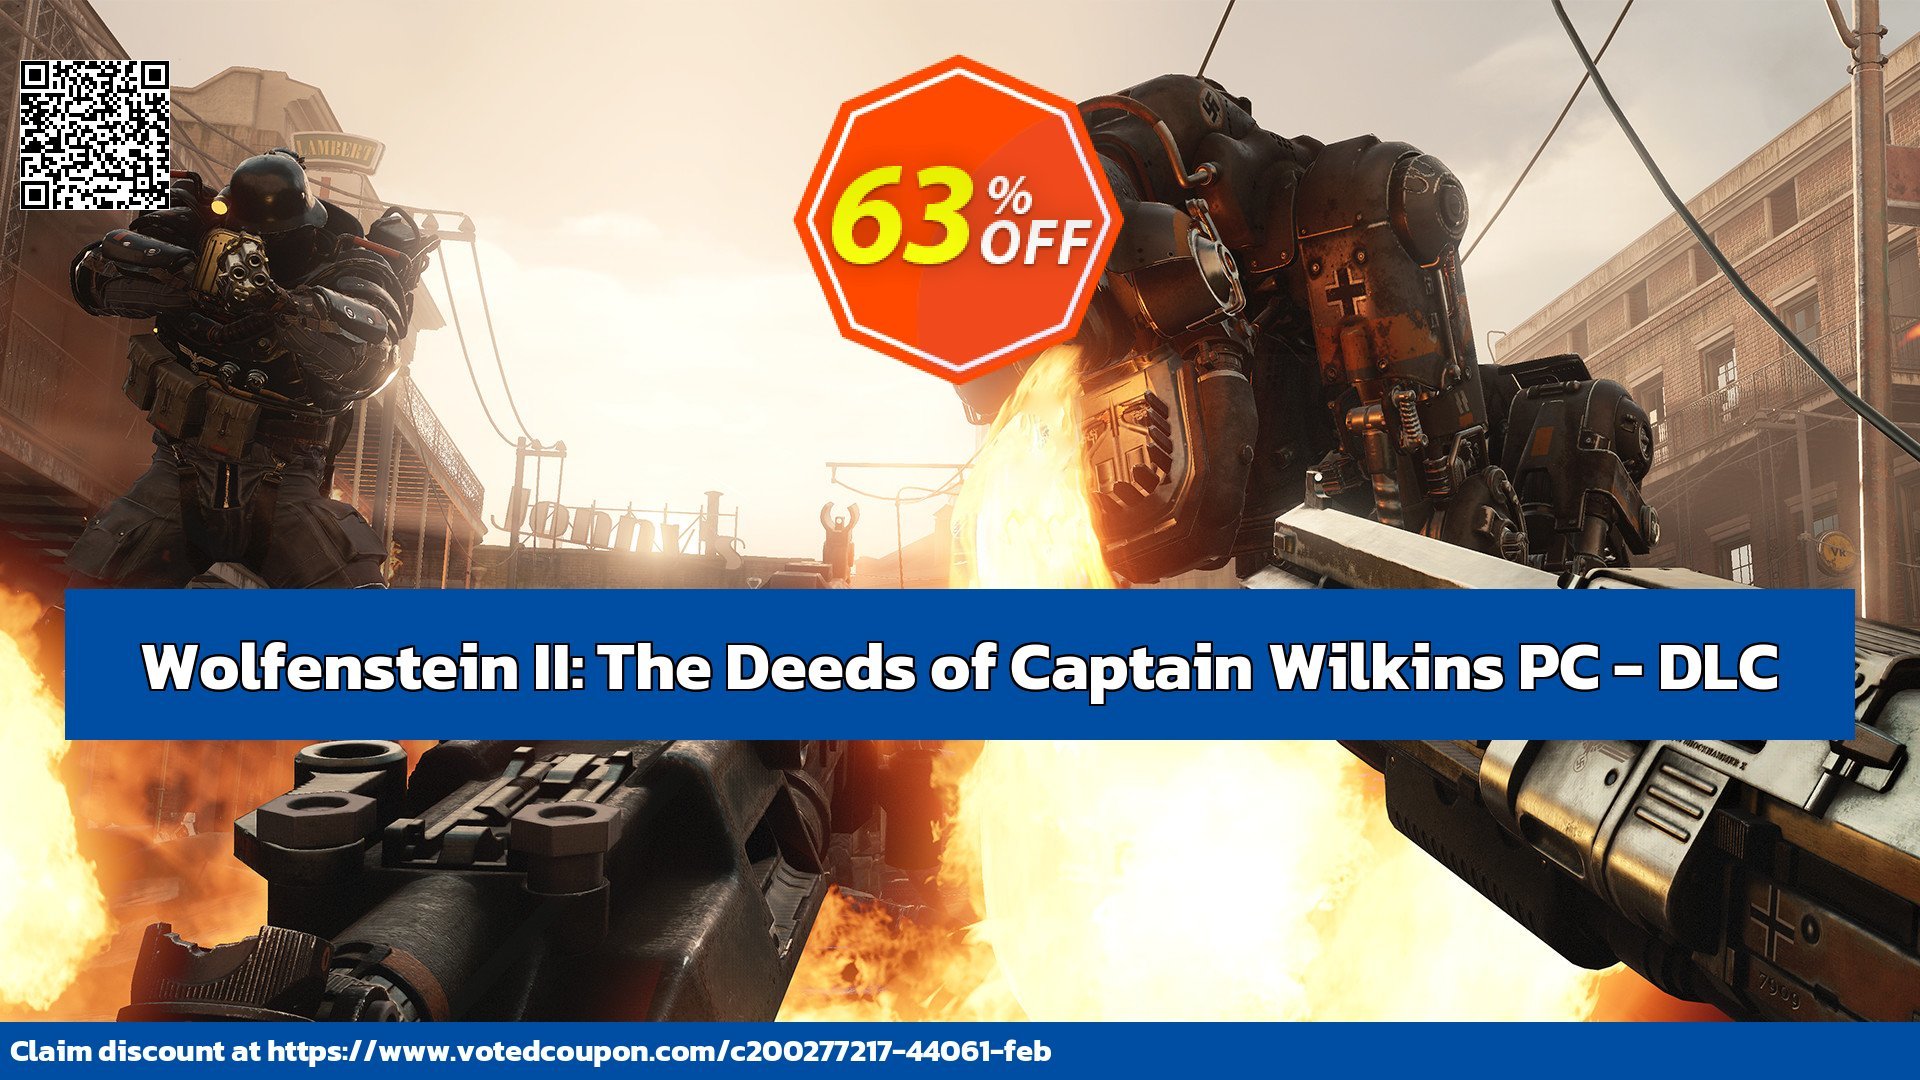 Wolfenstein II: The Deeds of Captain Wilkins PC - DLC Coupon Code May 2024, 69% OFF - VotedCoupon